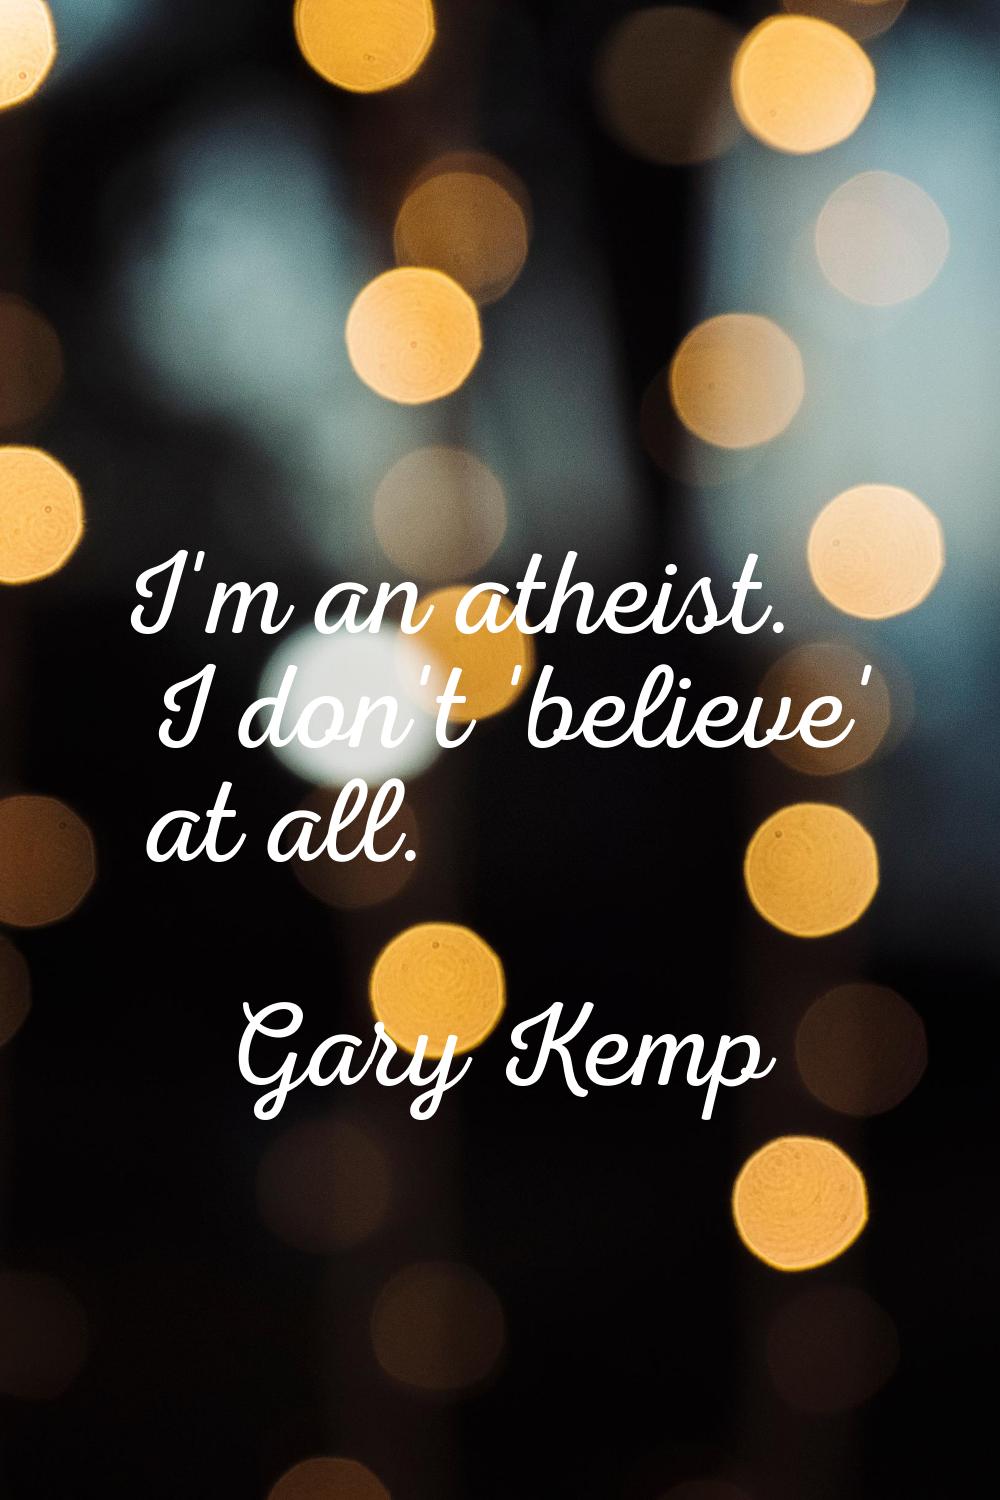 I'm an atheist. I don't 'believe' at all.